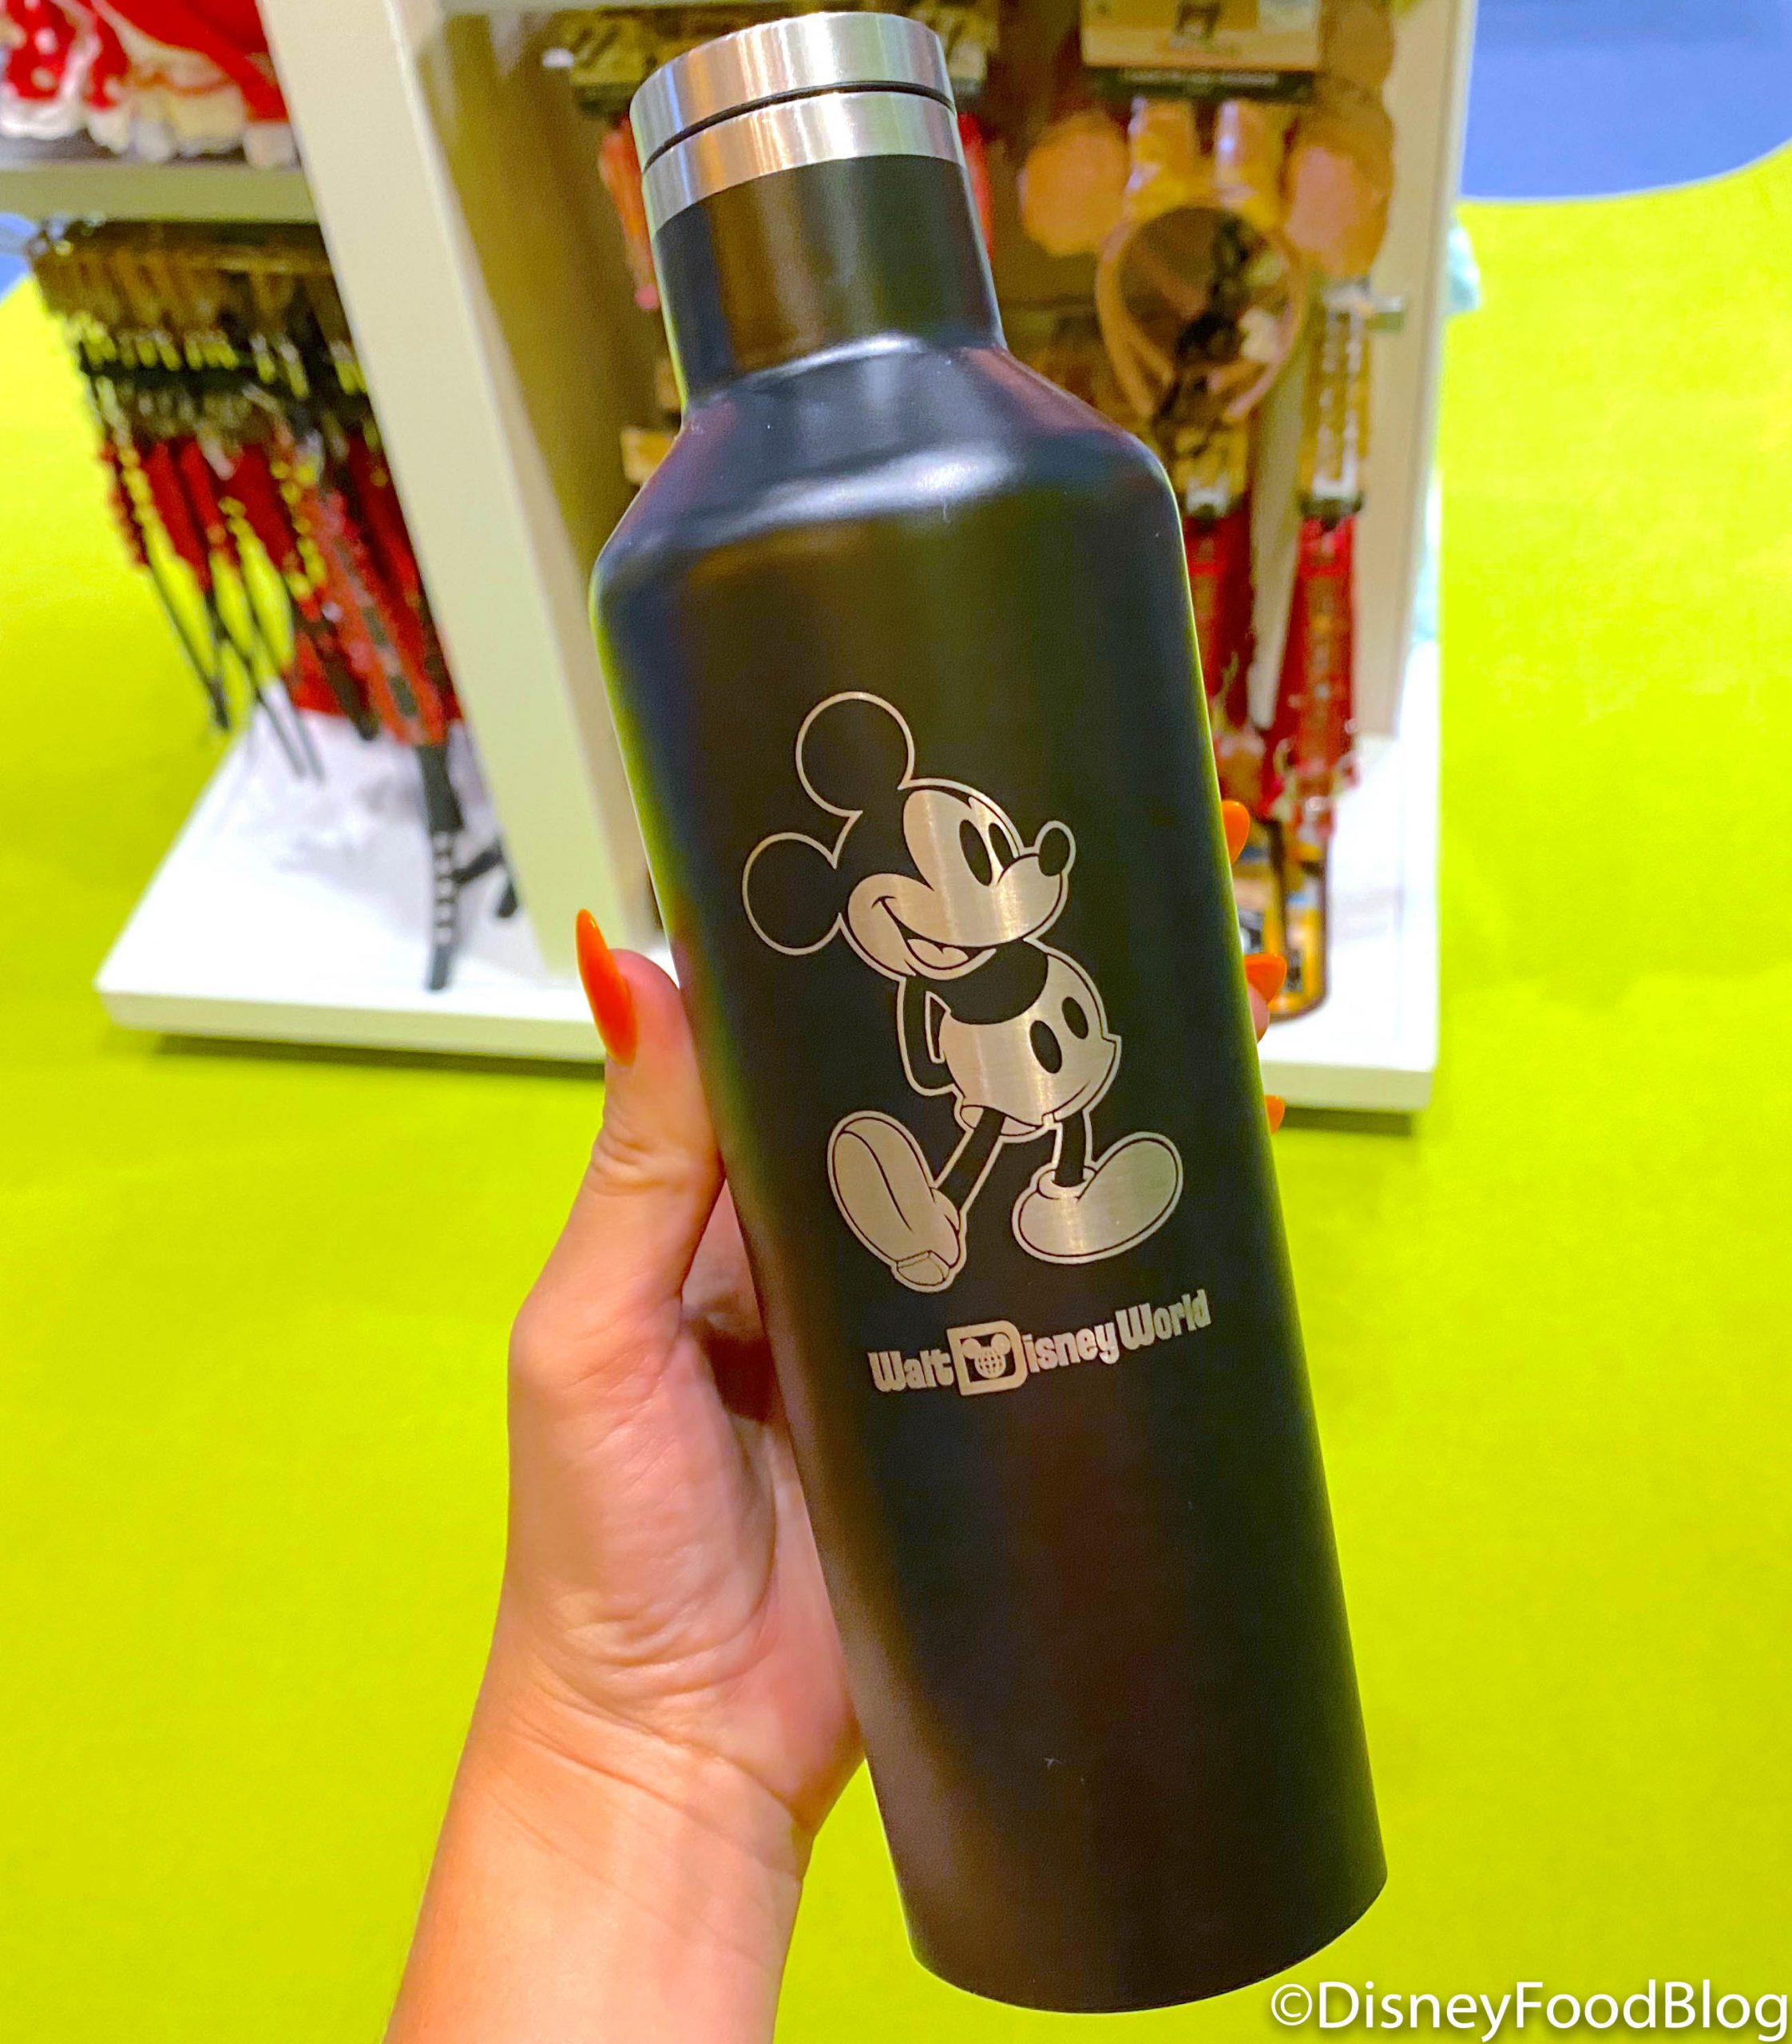 https://www.disneyfoodblog.com/wp-content/uploads/2020/11/2020-reopening-wdw-epcot-mickey-black-corkcicle-canteen-scaled.jpg